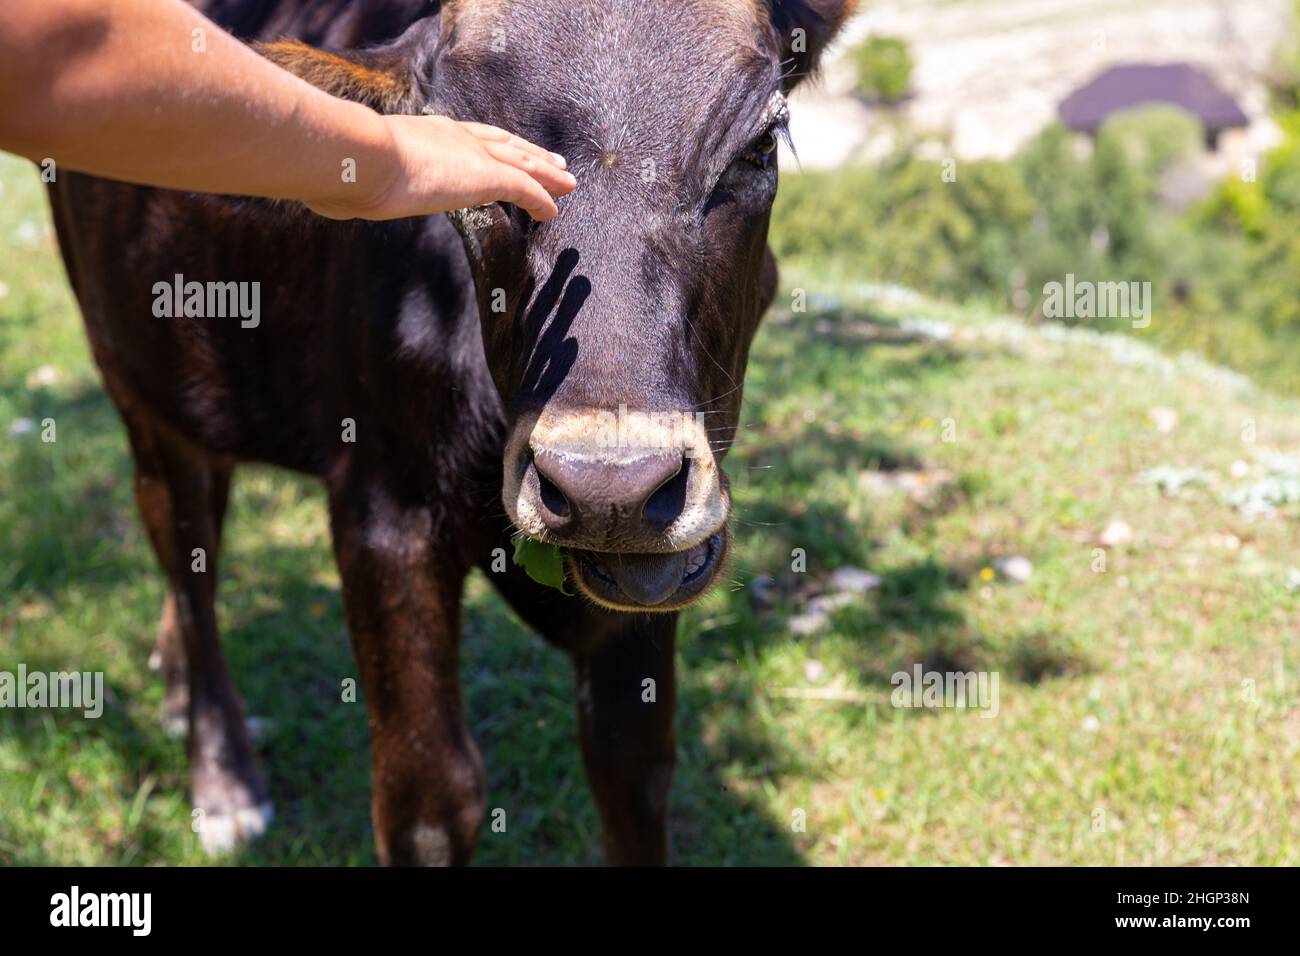 Human hand strokes head of young brown bull or cow. A chocolate colored calf grazes in shade of trees on hot summer day. Caring for domestic animals Stock Photo